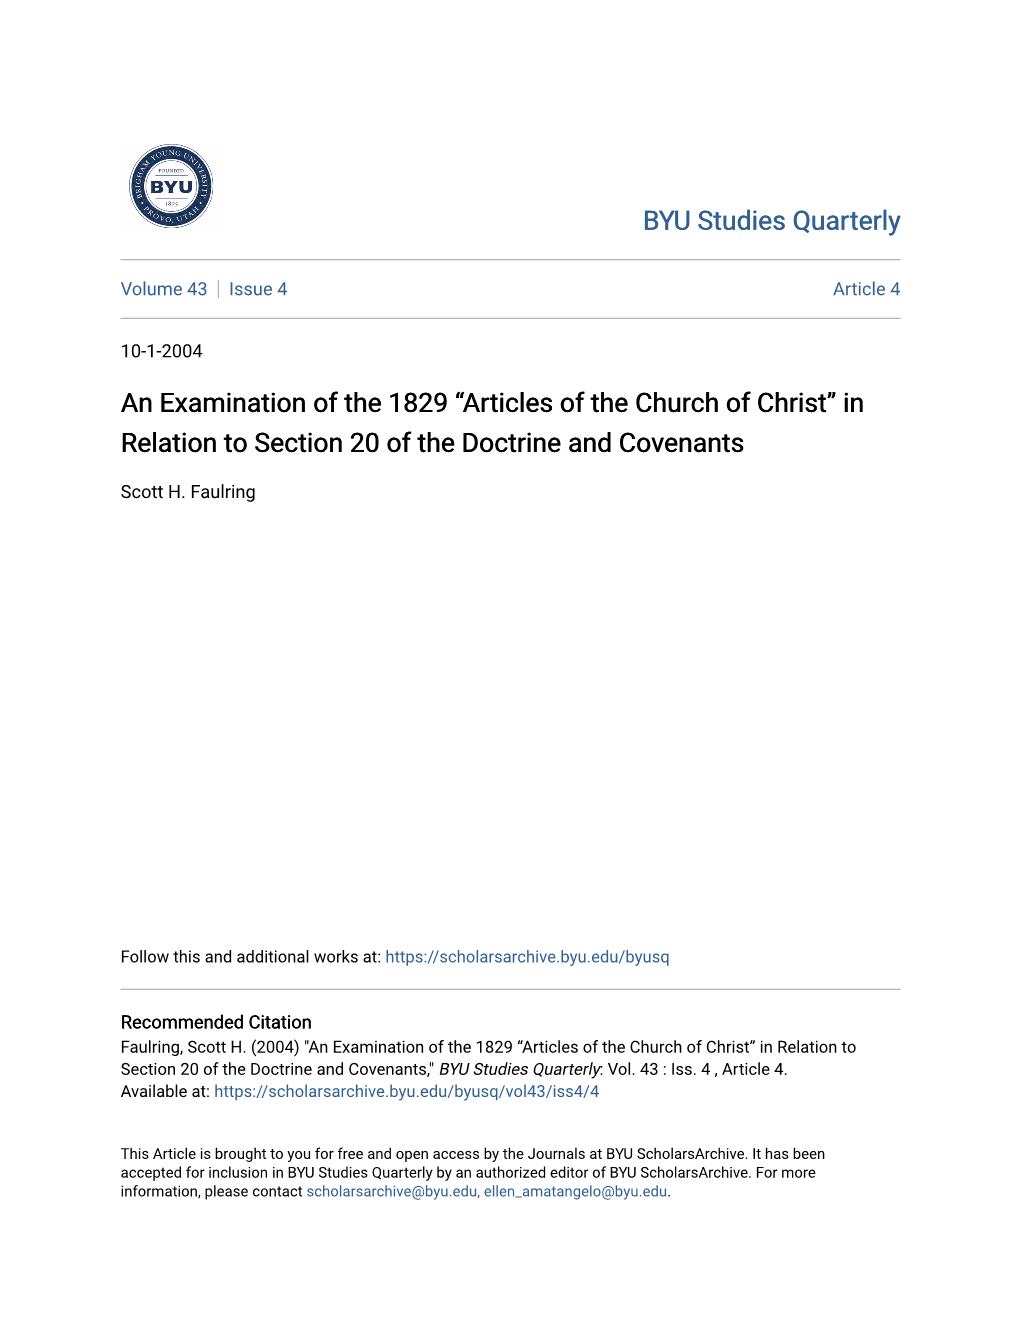 Articles of the Church of Christ” in Relation to Section 20 of the Doctrine and Covenants